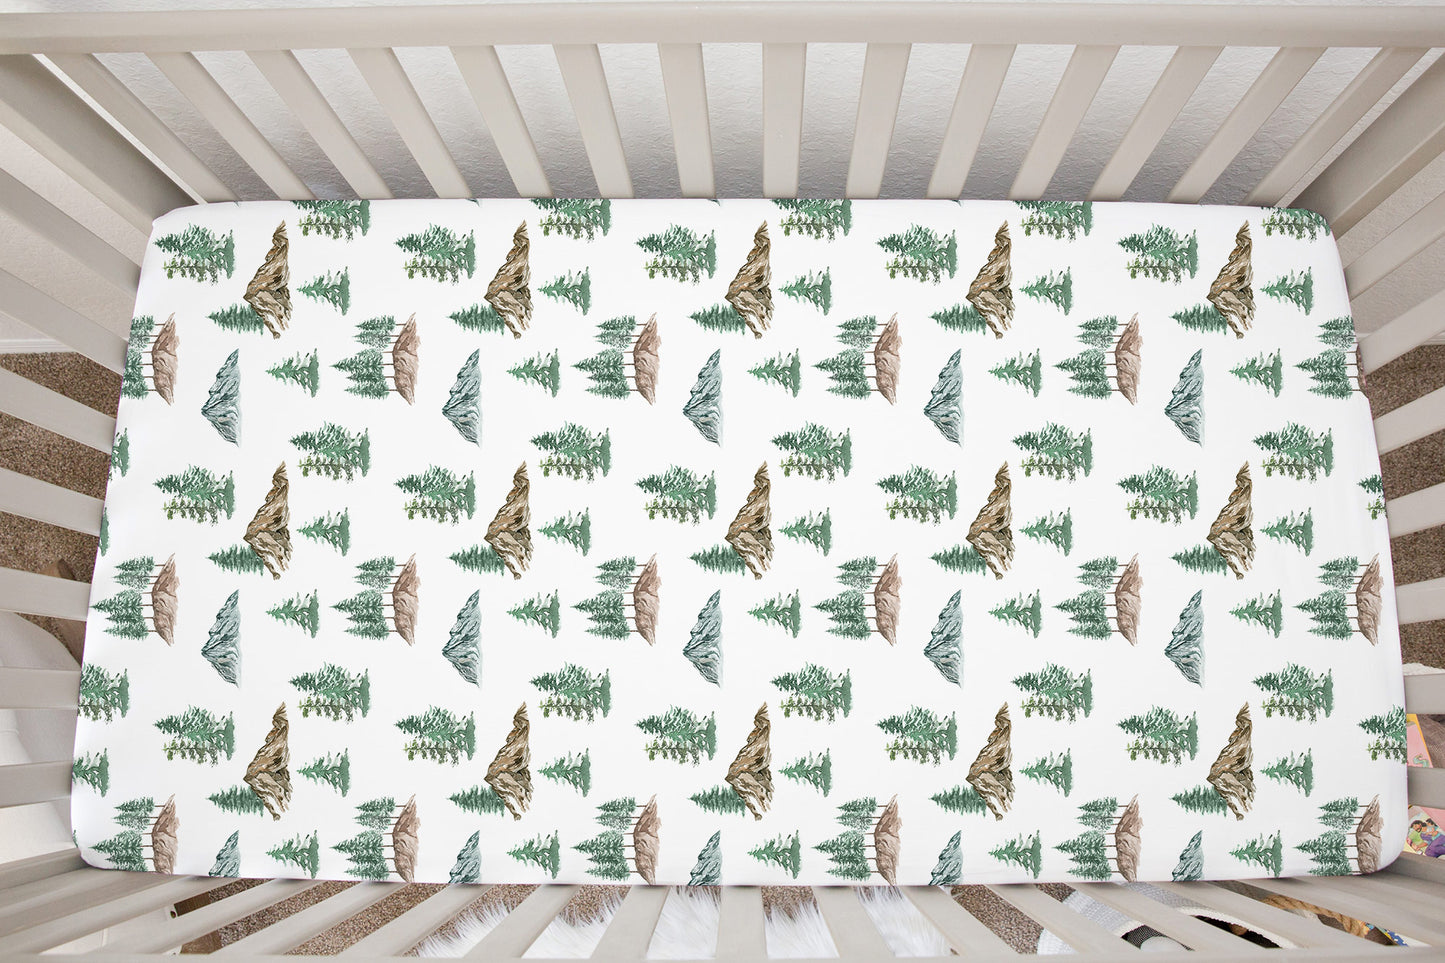 Mountains and Pine Trees Crib Sheet, Forest Nursery Bedding - Little Explorer